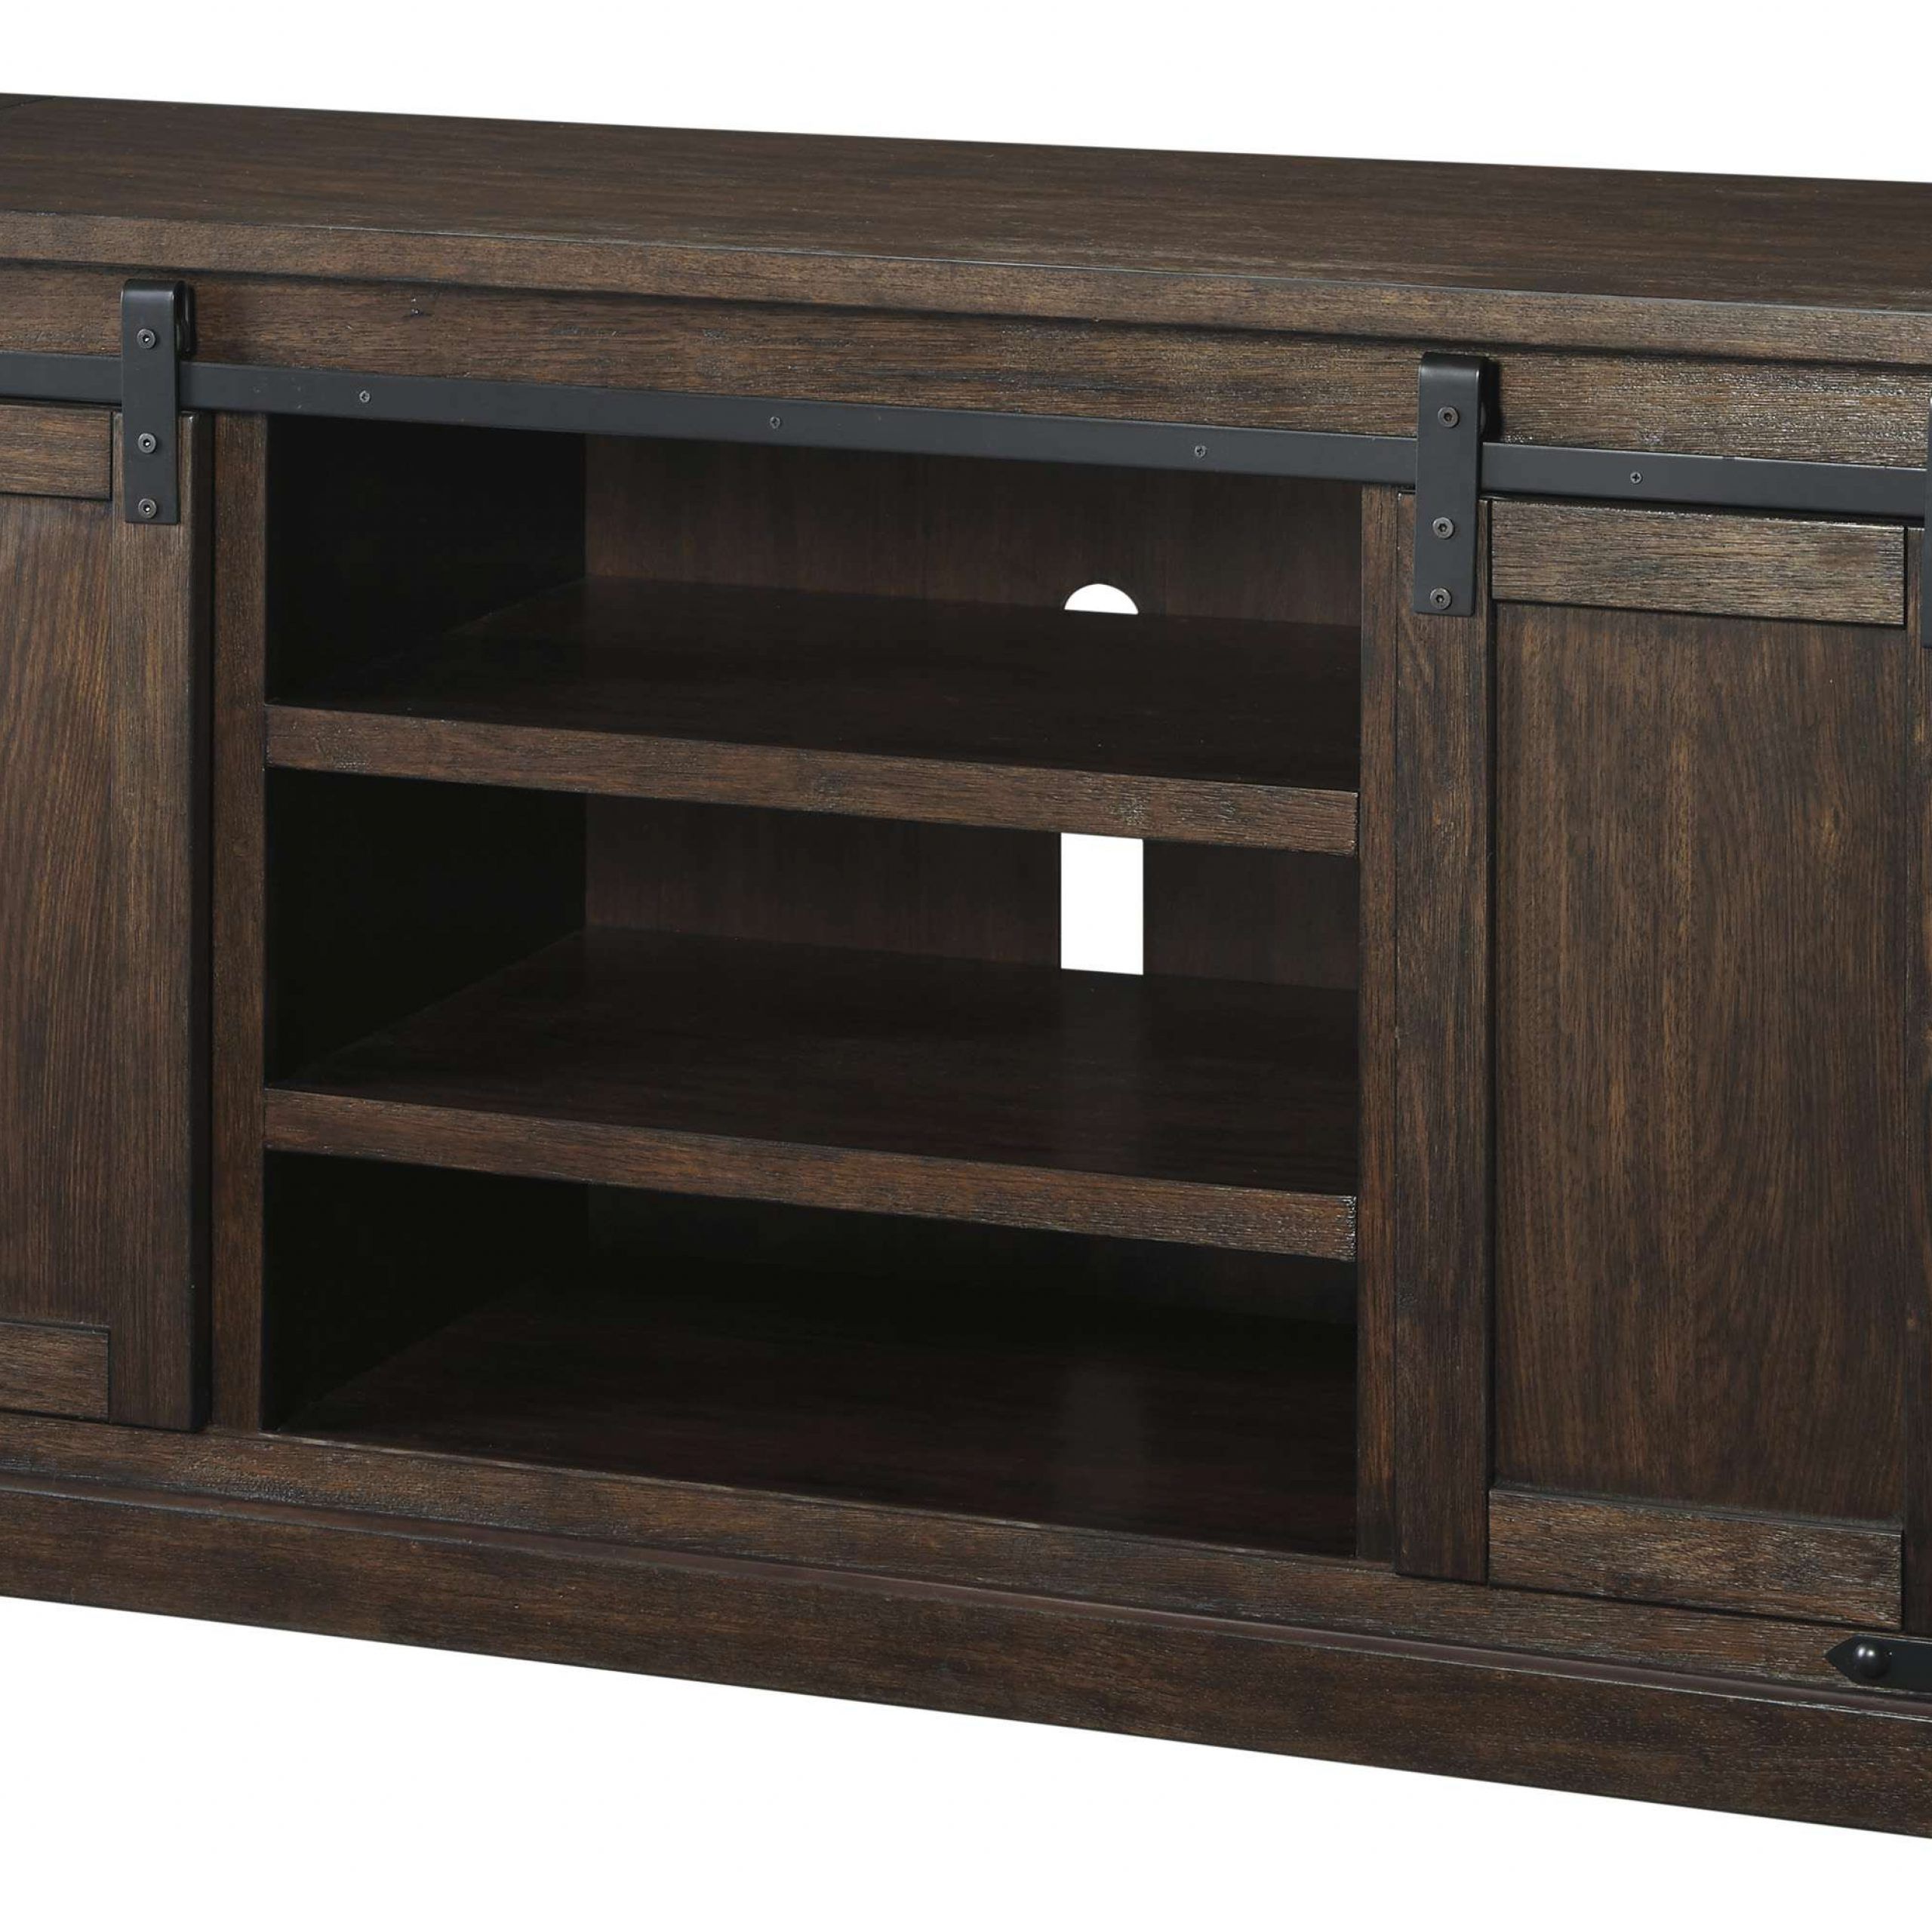 Signature Designashley Budmore Rustic Brown Large Tv Throughout Industrial Tv Stands With Metal Legs Rustic Brown (View 12 of 20)